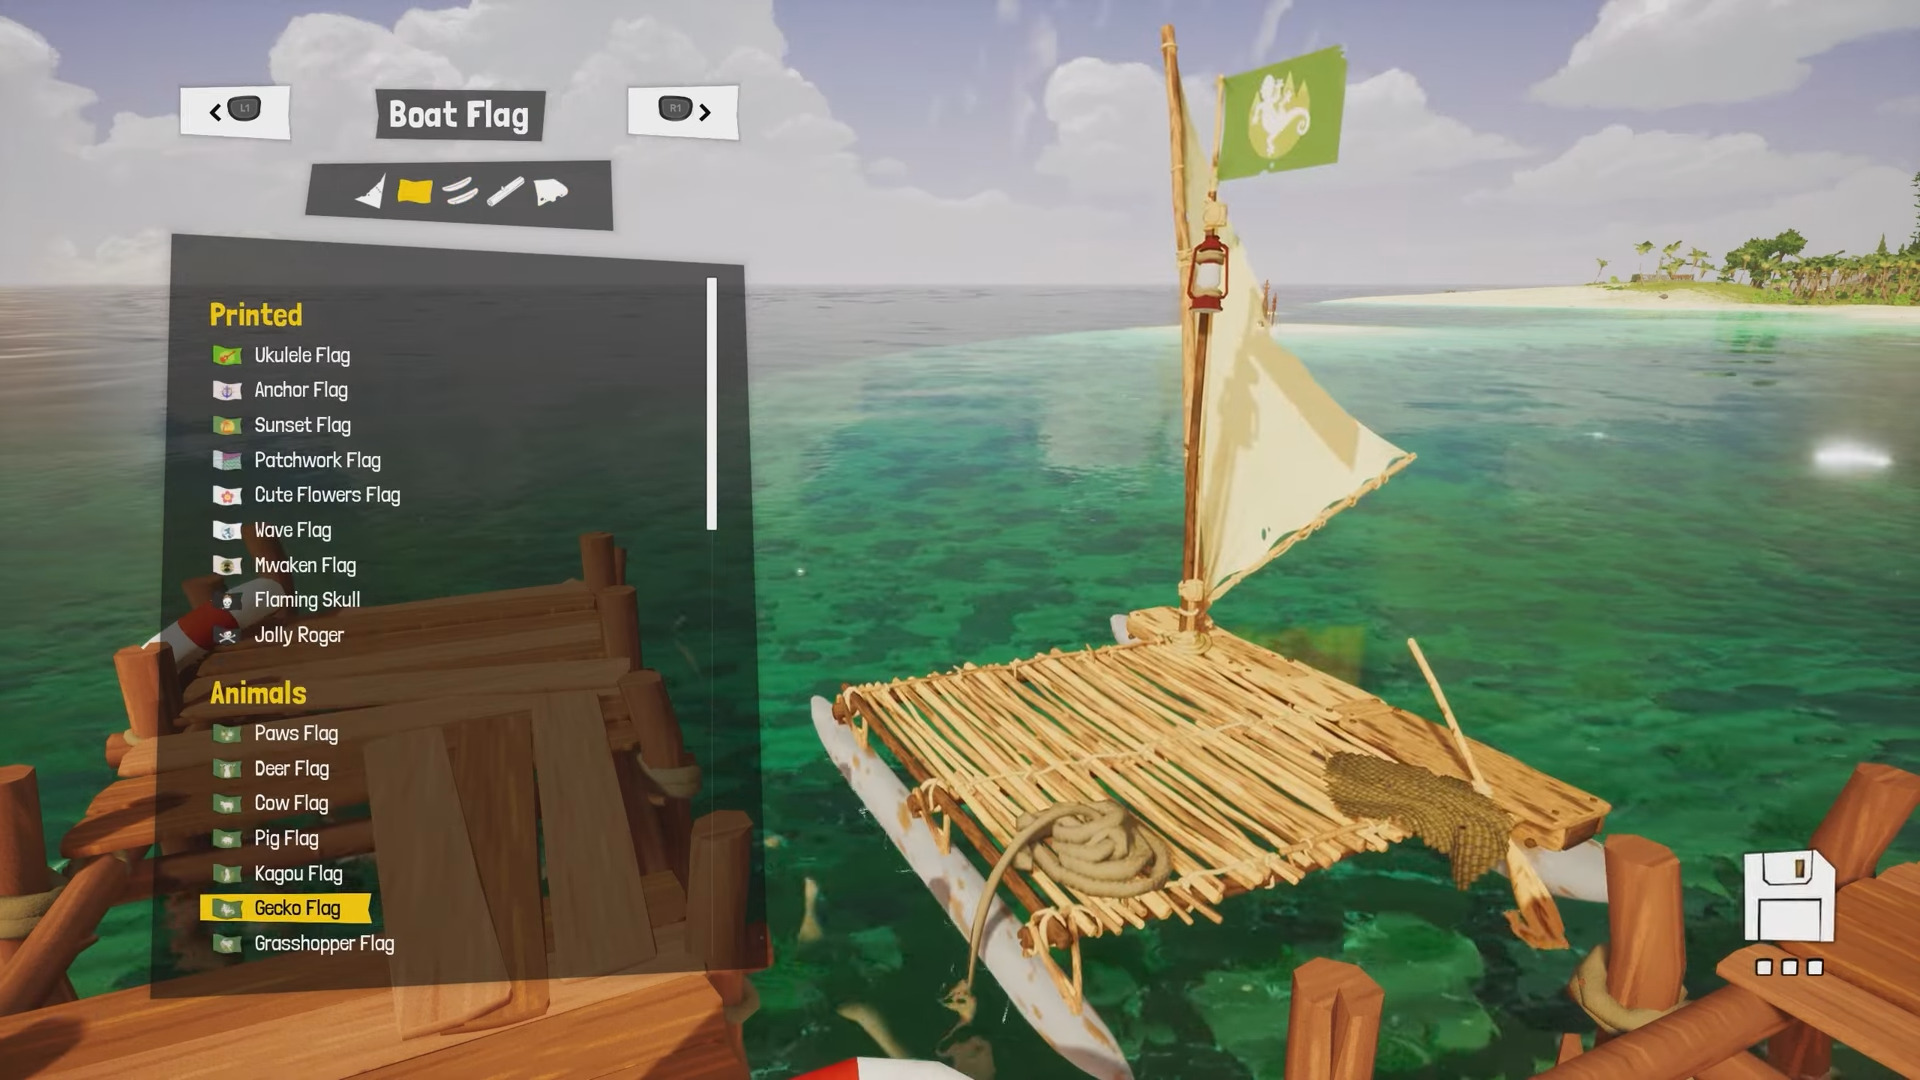 Awaceb spoke about the character's customisation in Tchia. Players will be able to search for different clothes, create their own boat, and have a film camera in their arsenal -11